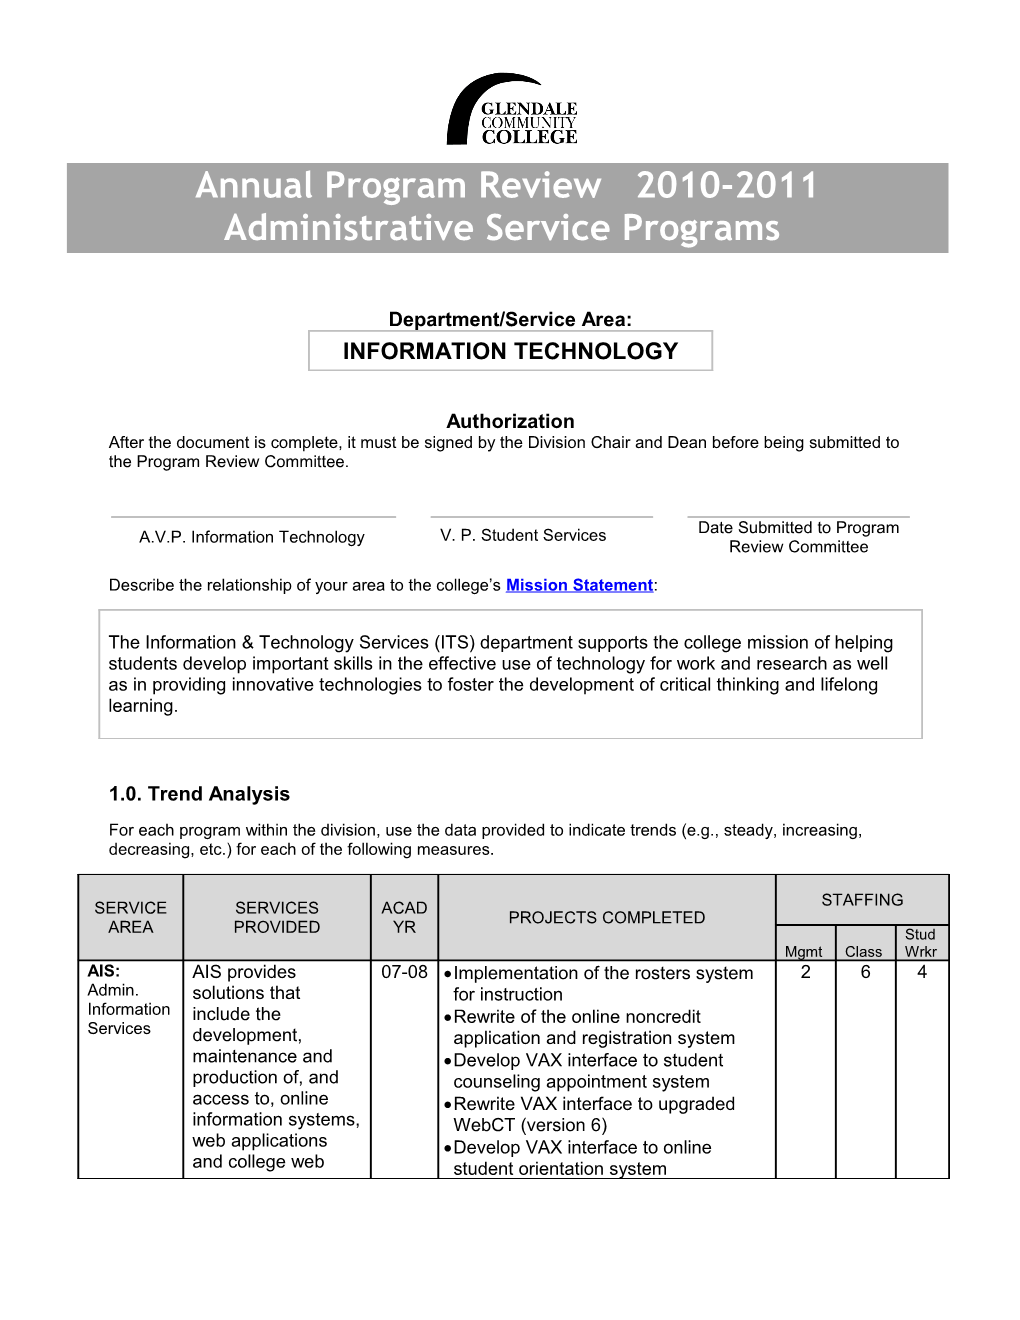 Annual Program Review, Fall Report, Instructional Programs, 2010-2011